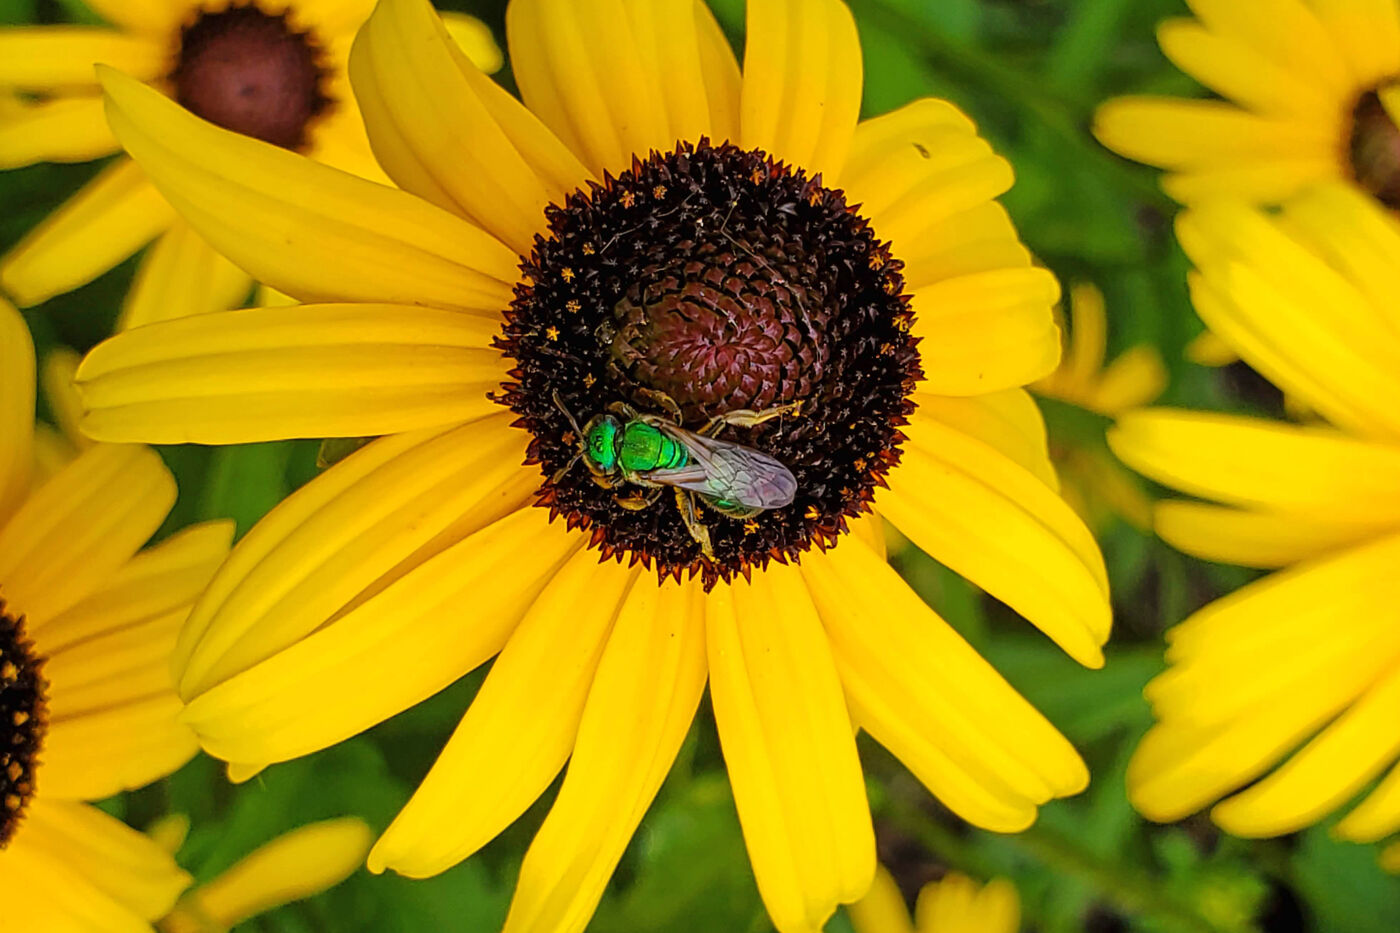 A metallic green bee foraging on a flower with a brown center, surrounded by yellow petals.